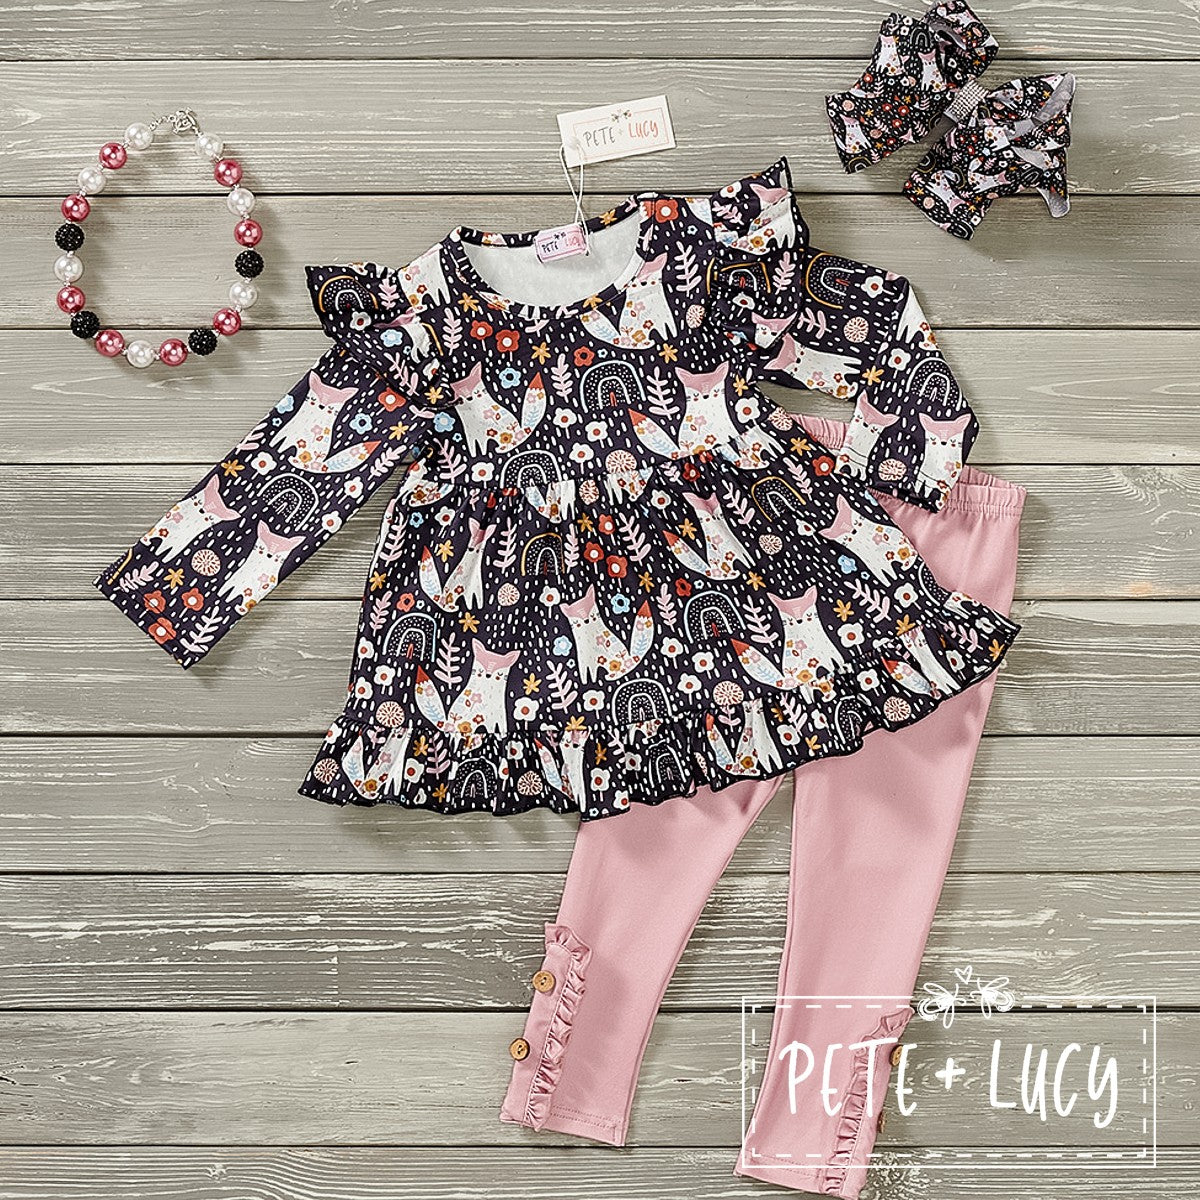 Pete + Lucy 5 Fox in Nature - 2 Piece Set